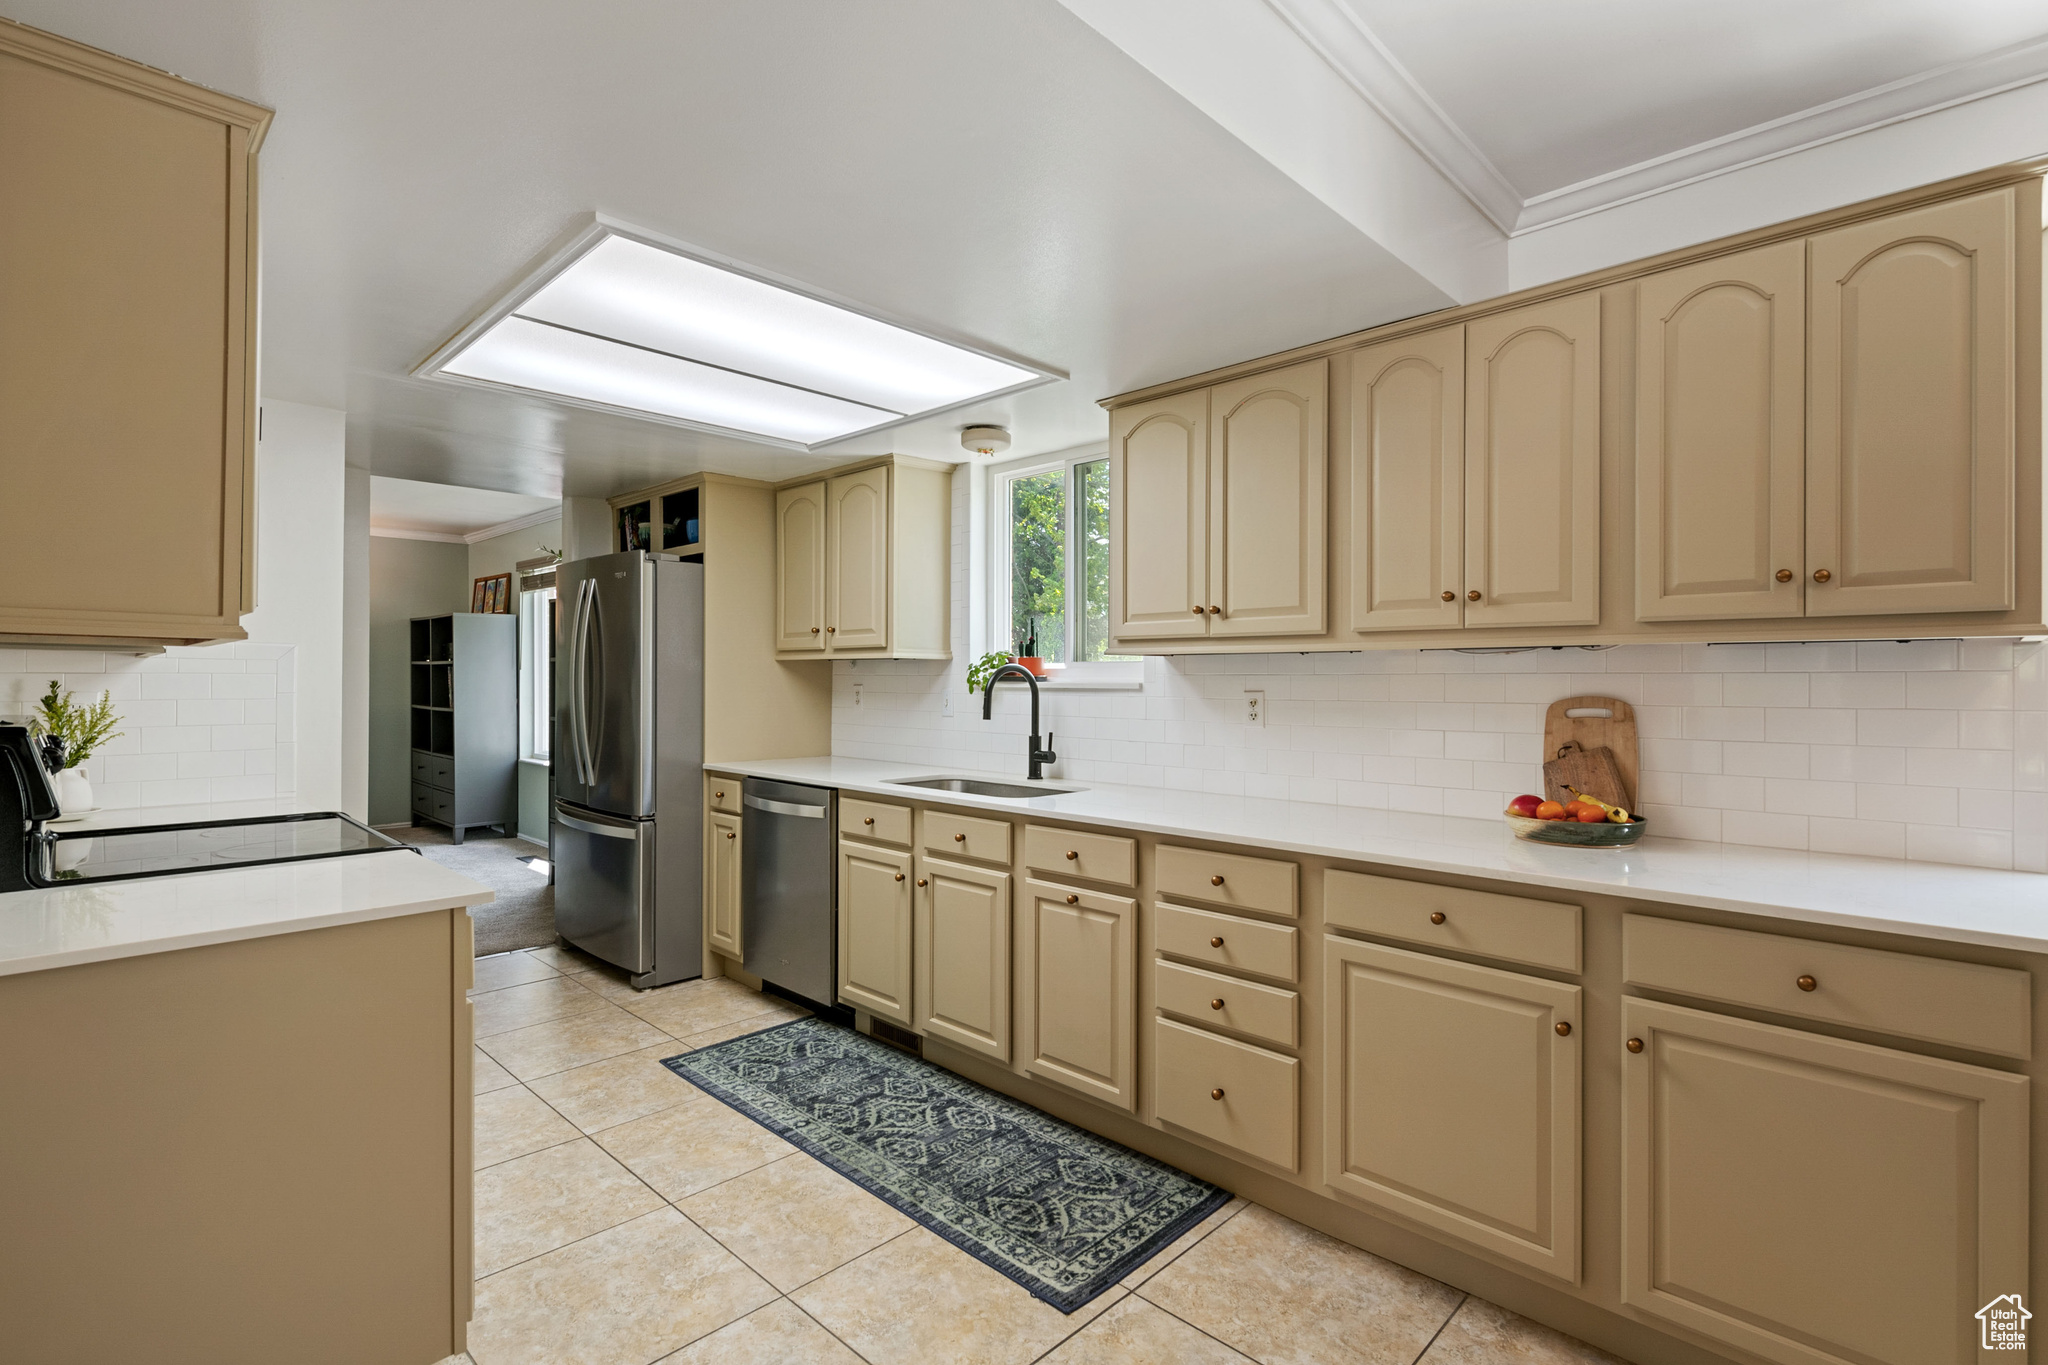 Kitchen featuring crown molding, appliances with stainless steel finishes, sink, light tile floors, and tasteful backsplash